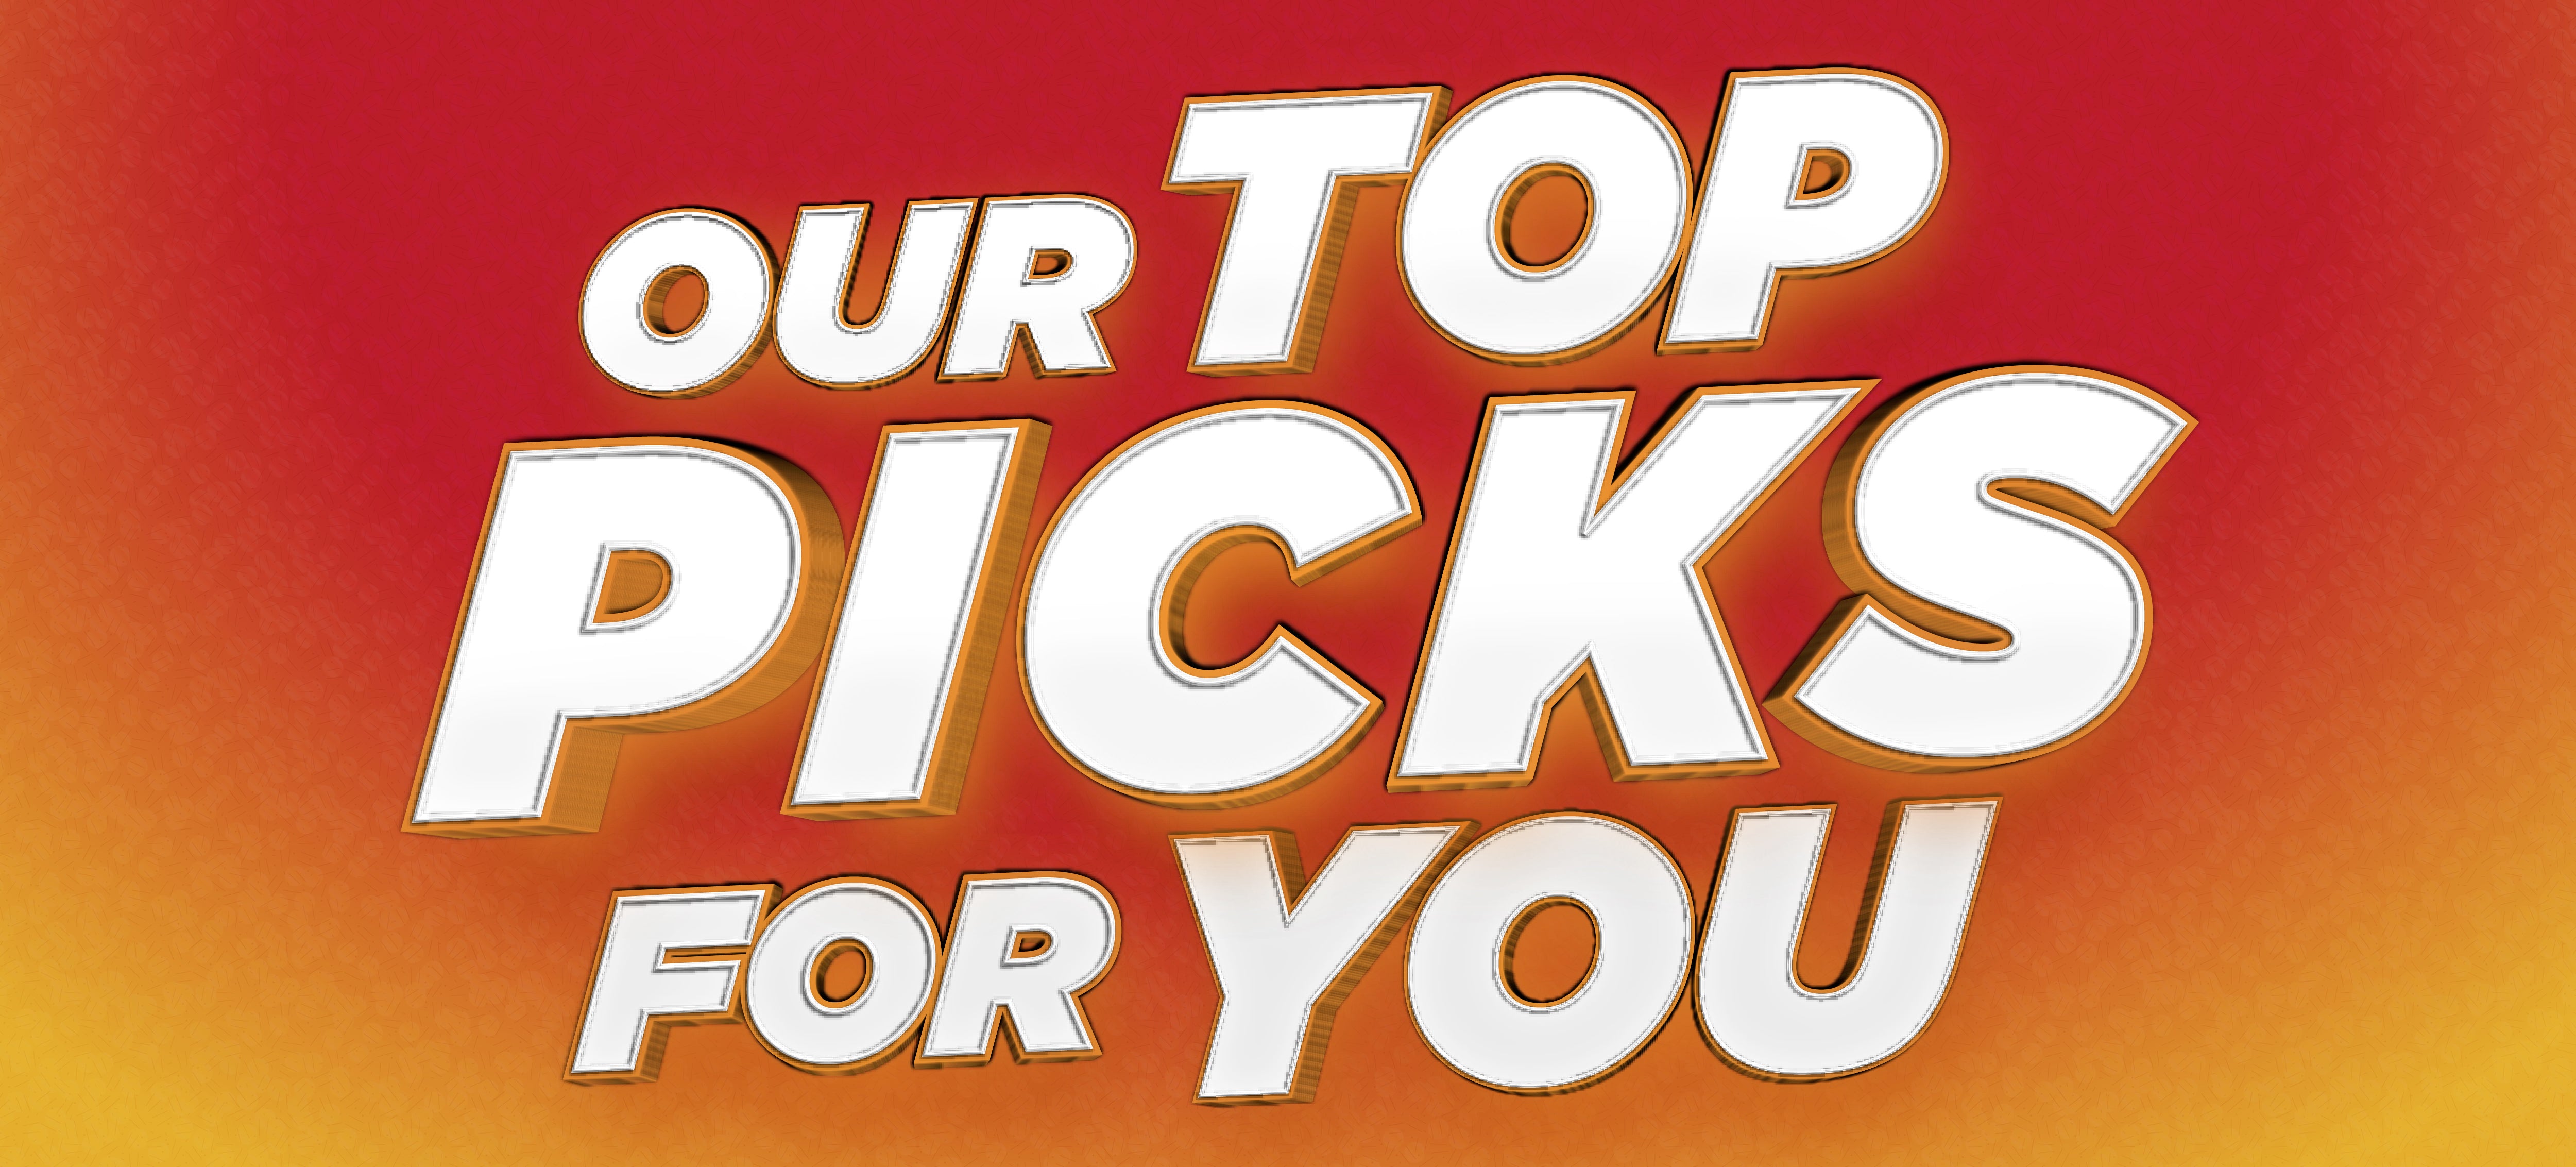 Our Top Picks For You